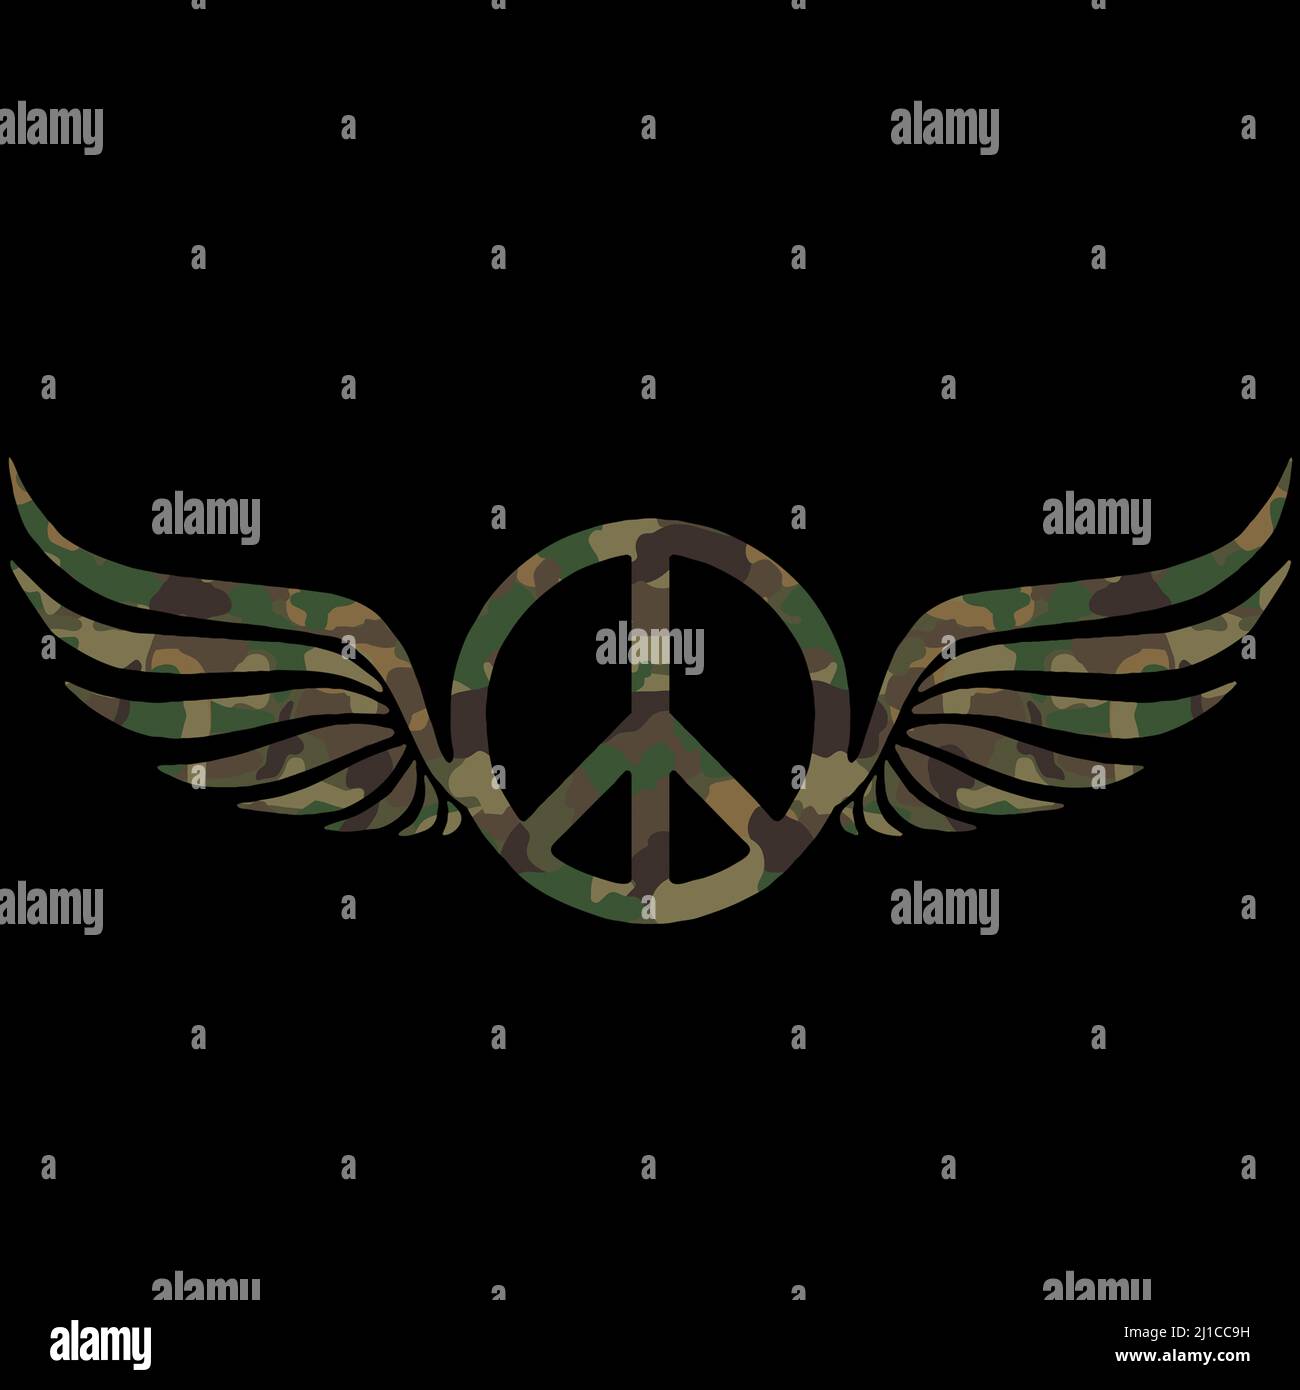 Royalty free camouflage pattern of different natural colors form a peace sign. Wings symbolize a peace dove. They carry the peace sign against black b Stock Photo